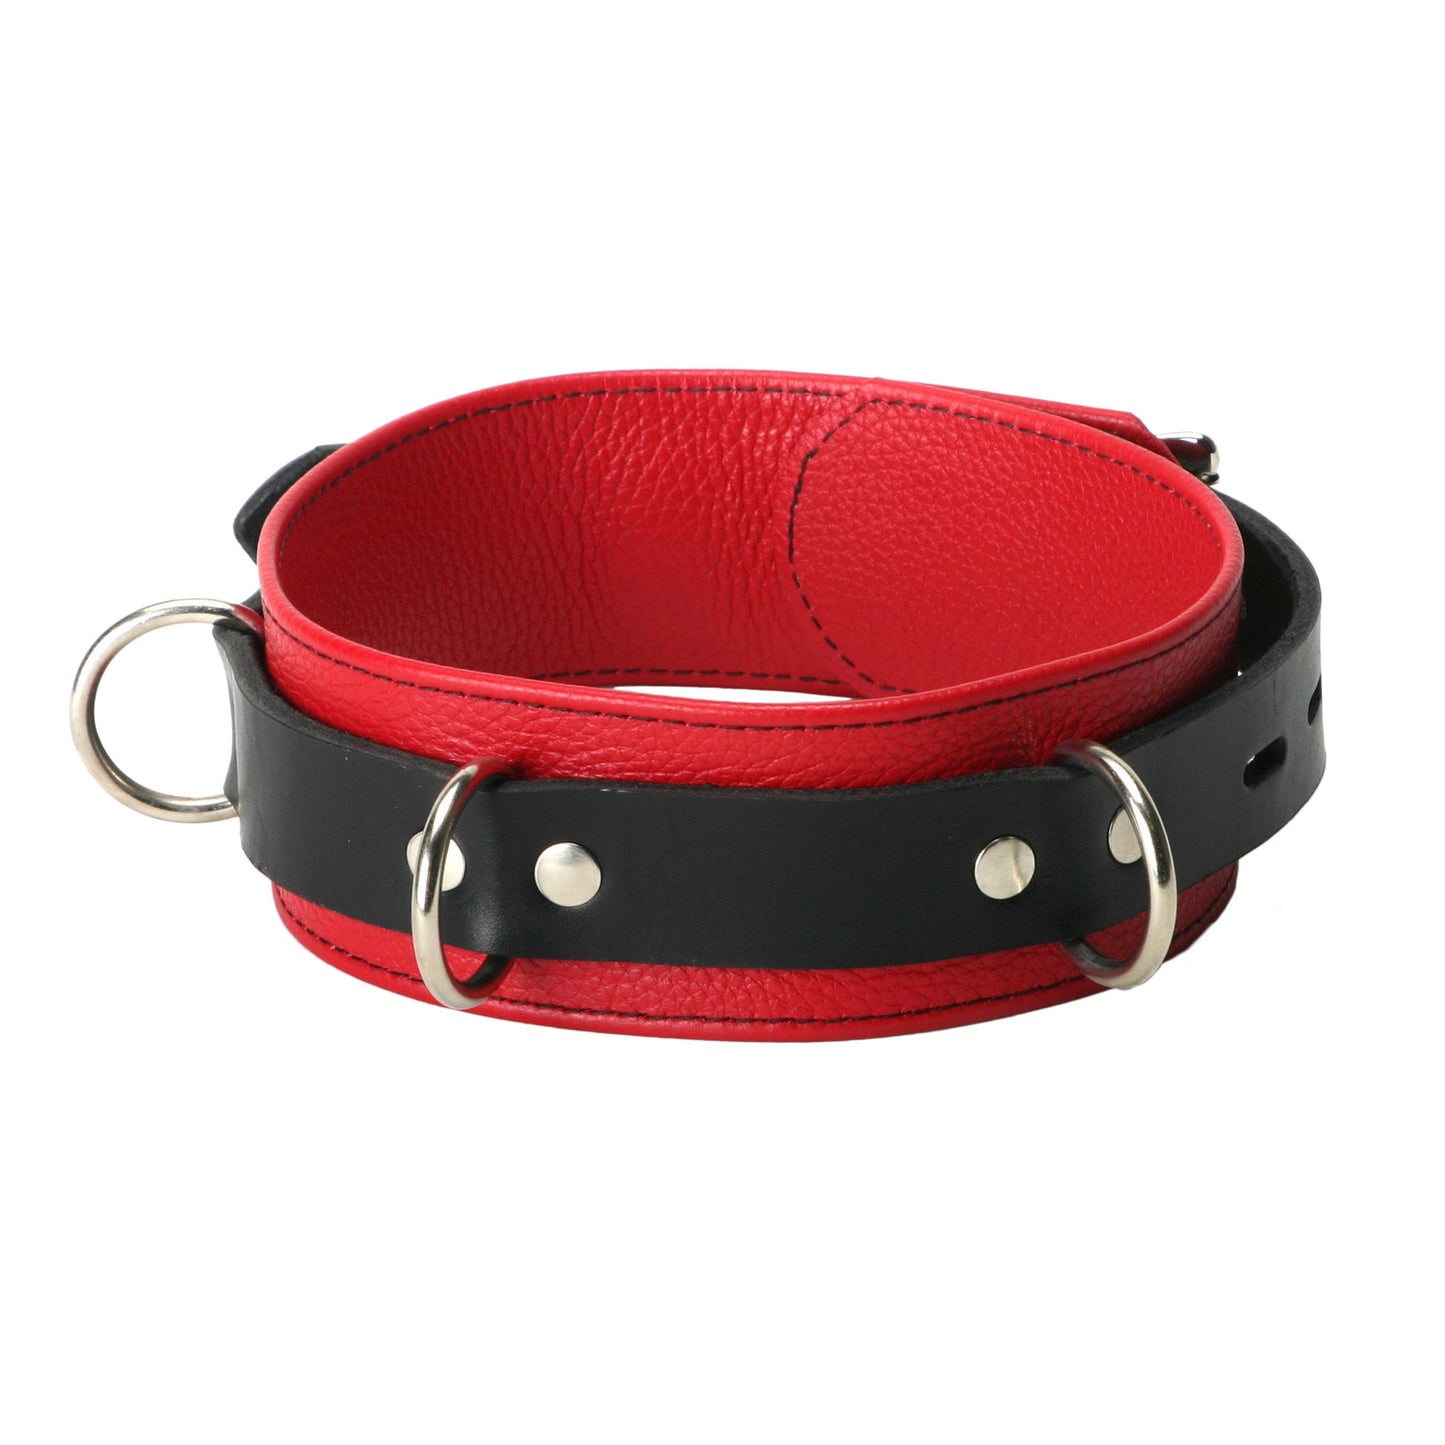 Strict Leather Deluxe Red and Black Locking Collar - UABDSM